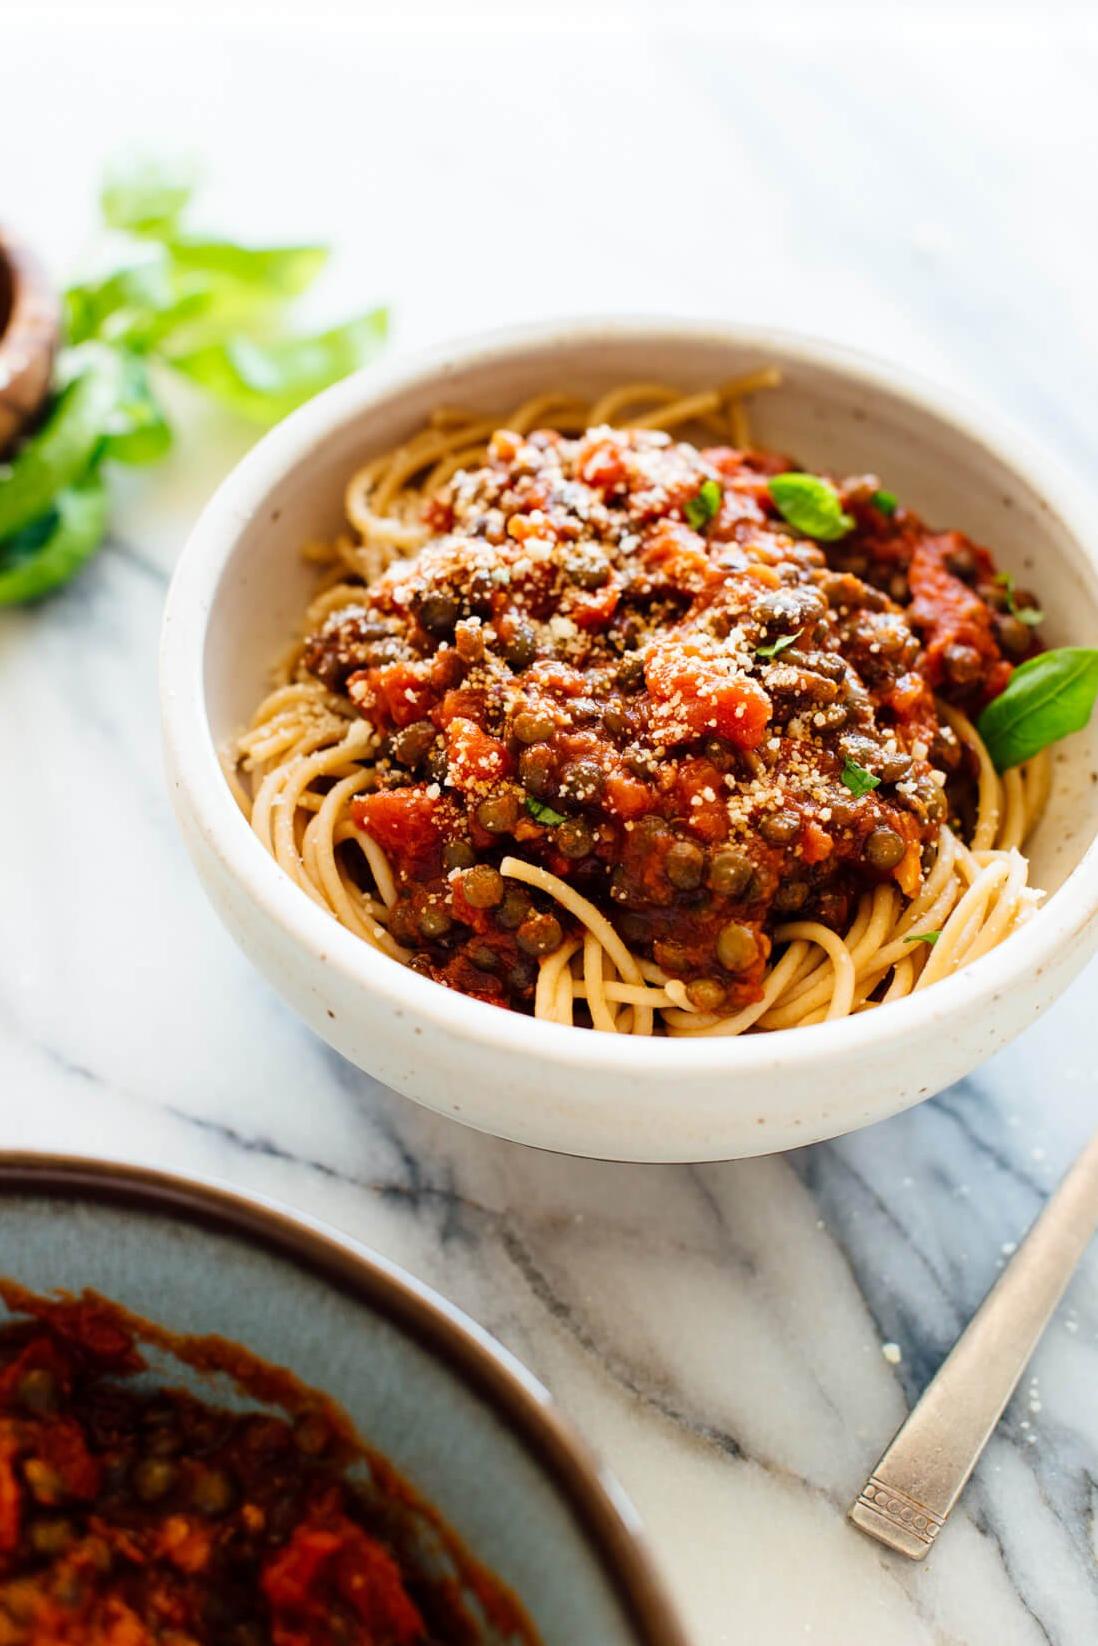  Red lentils bring a unique and satisfying flavour to this spaghetti sauce recipe.